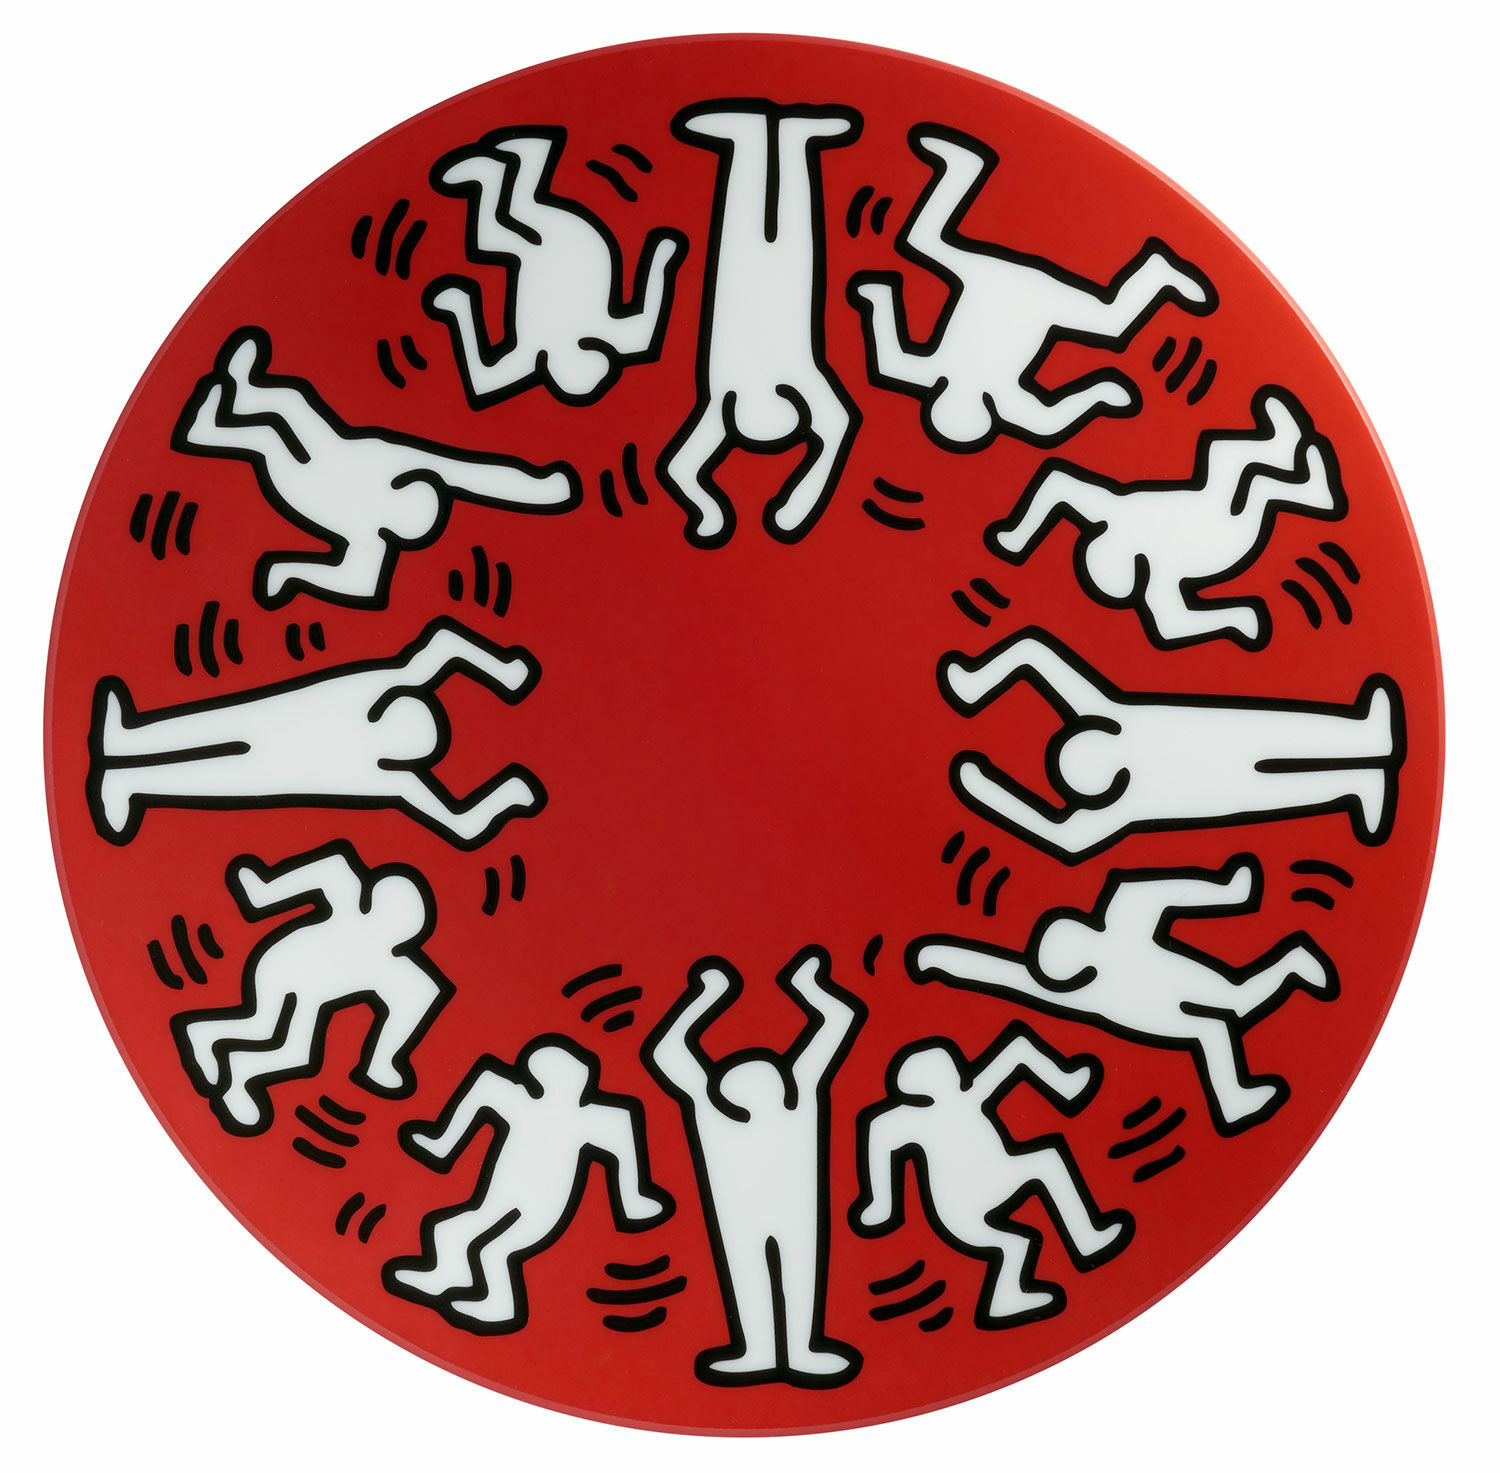 Porcelain plate "White on Red" by Keith Haring